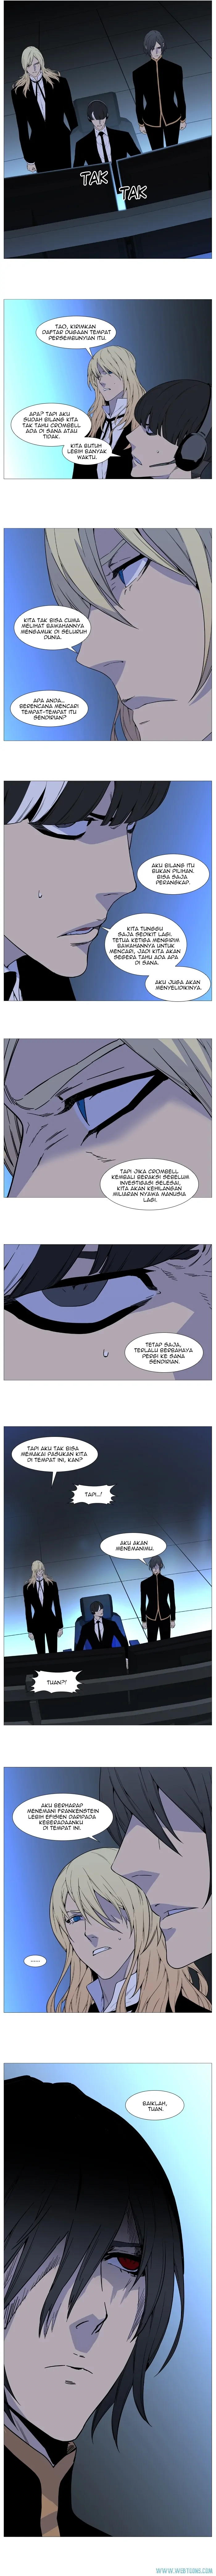 Noblesse Chapter 519 - 55